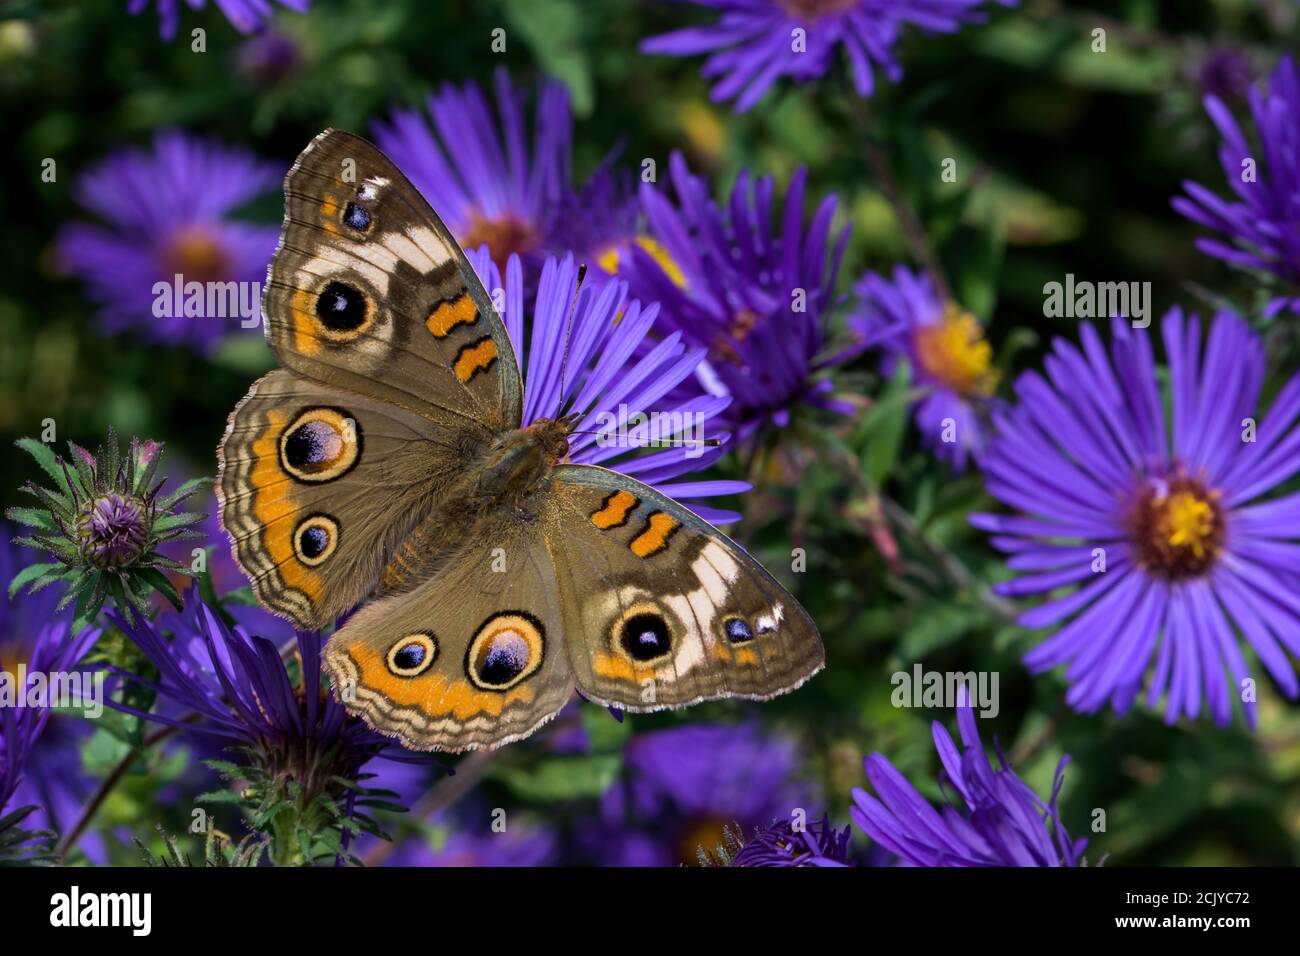 Junonia coenia, known as the common buckeye or buckeye on New England Aster. It is in the family Nymphalidae. Stock Photo